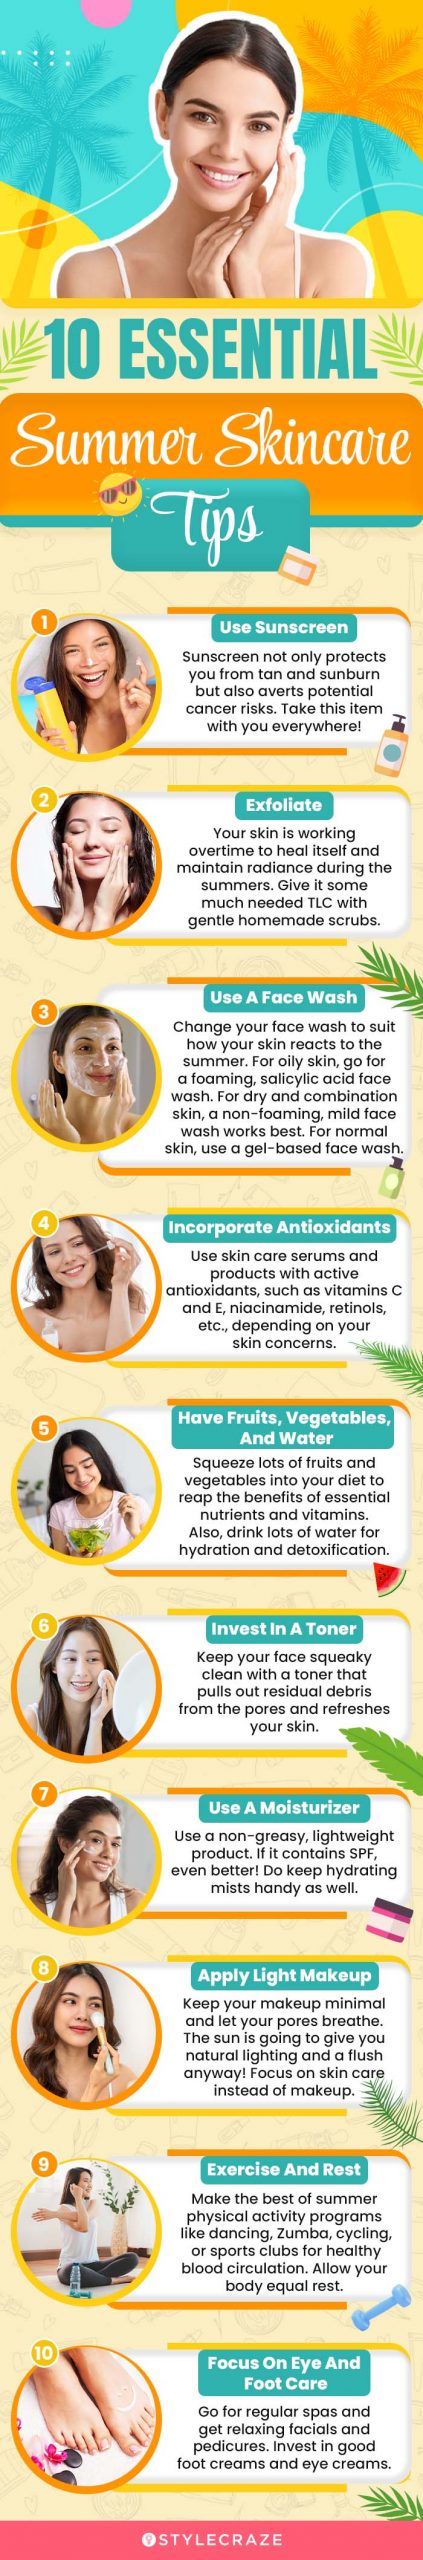 Stay Radiant: Effective Summer Skin Care Tips at Home